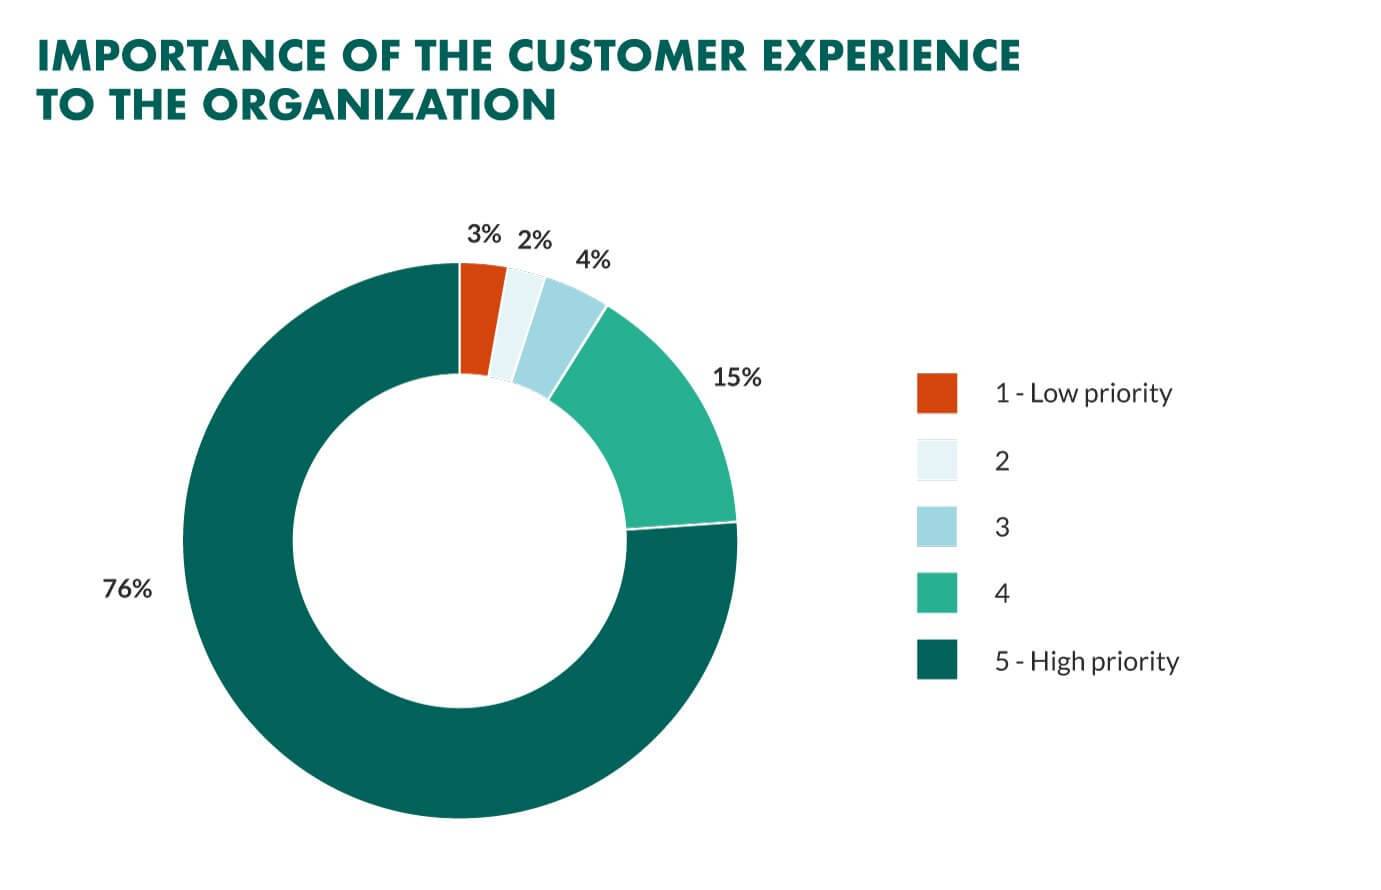 1. Introduction to CRM software and customer experience